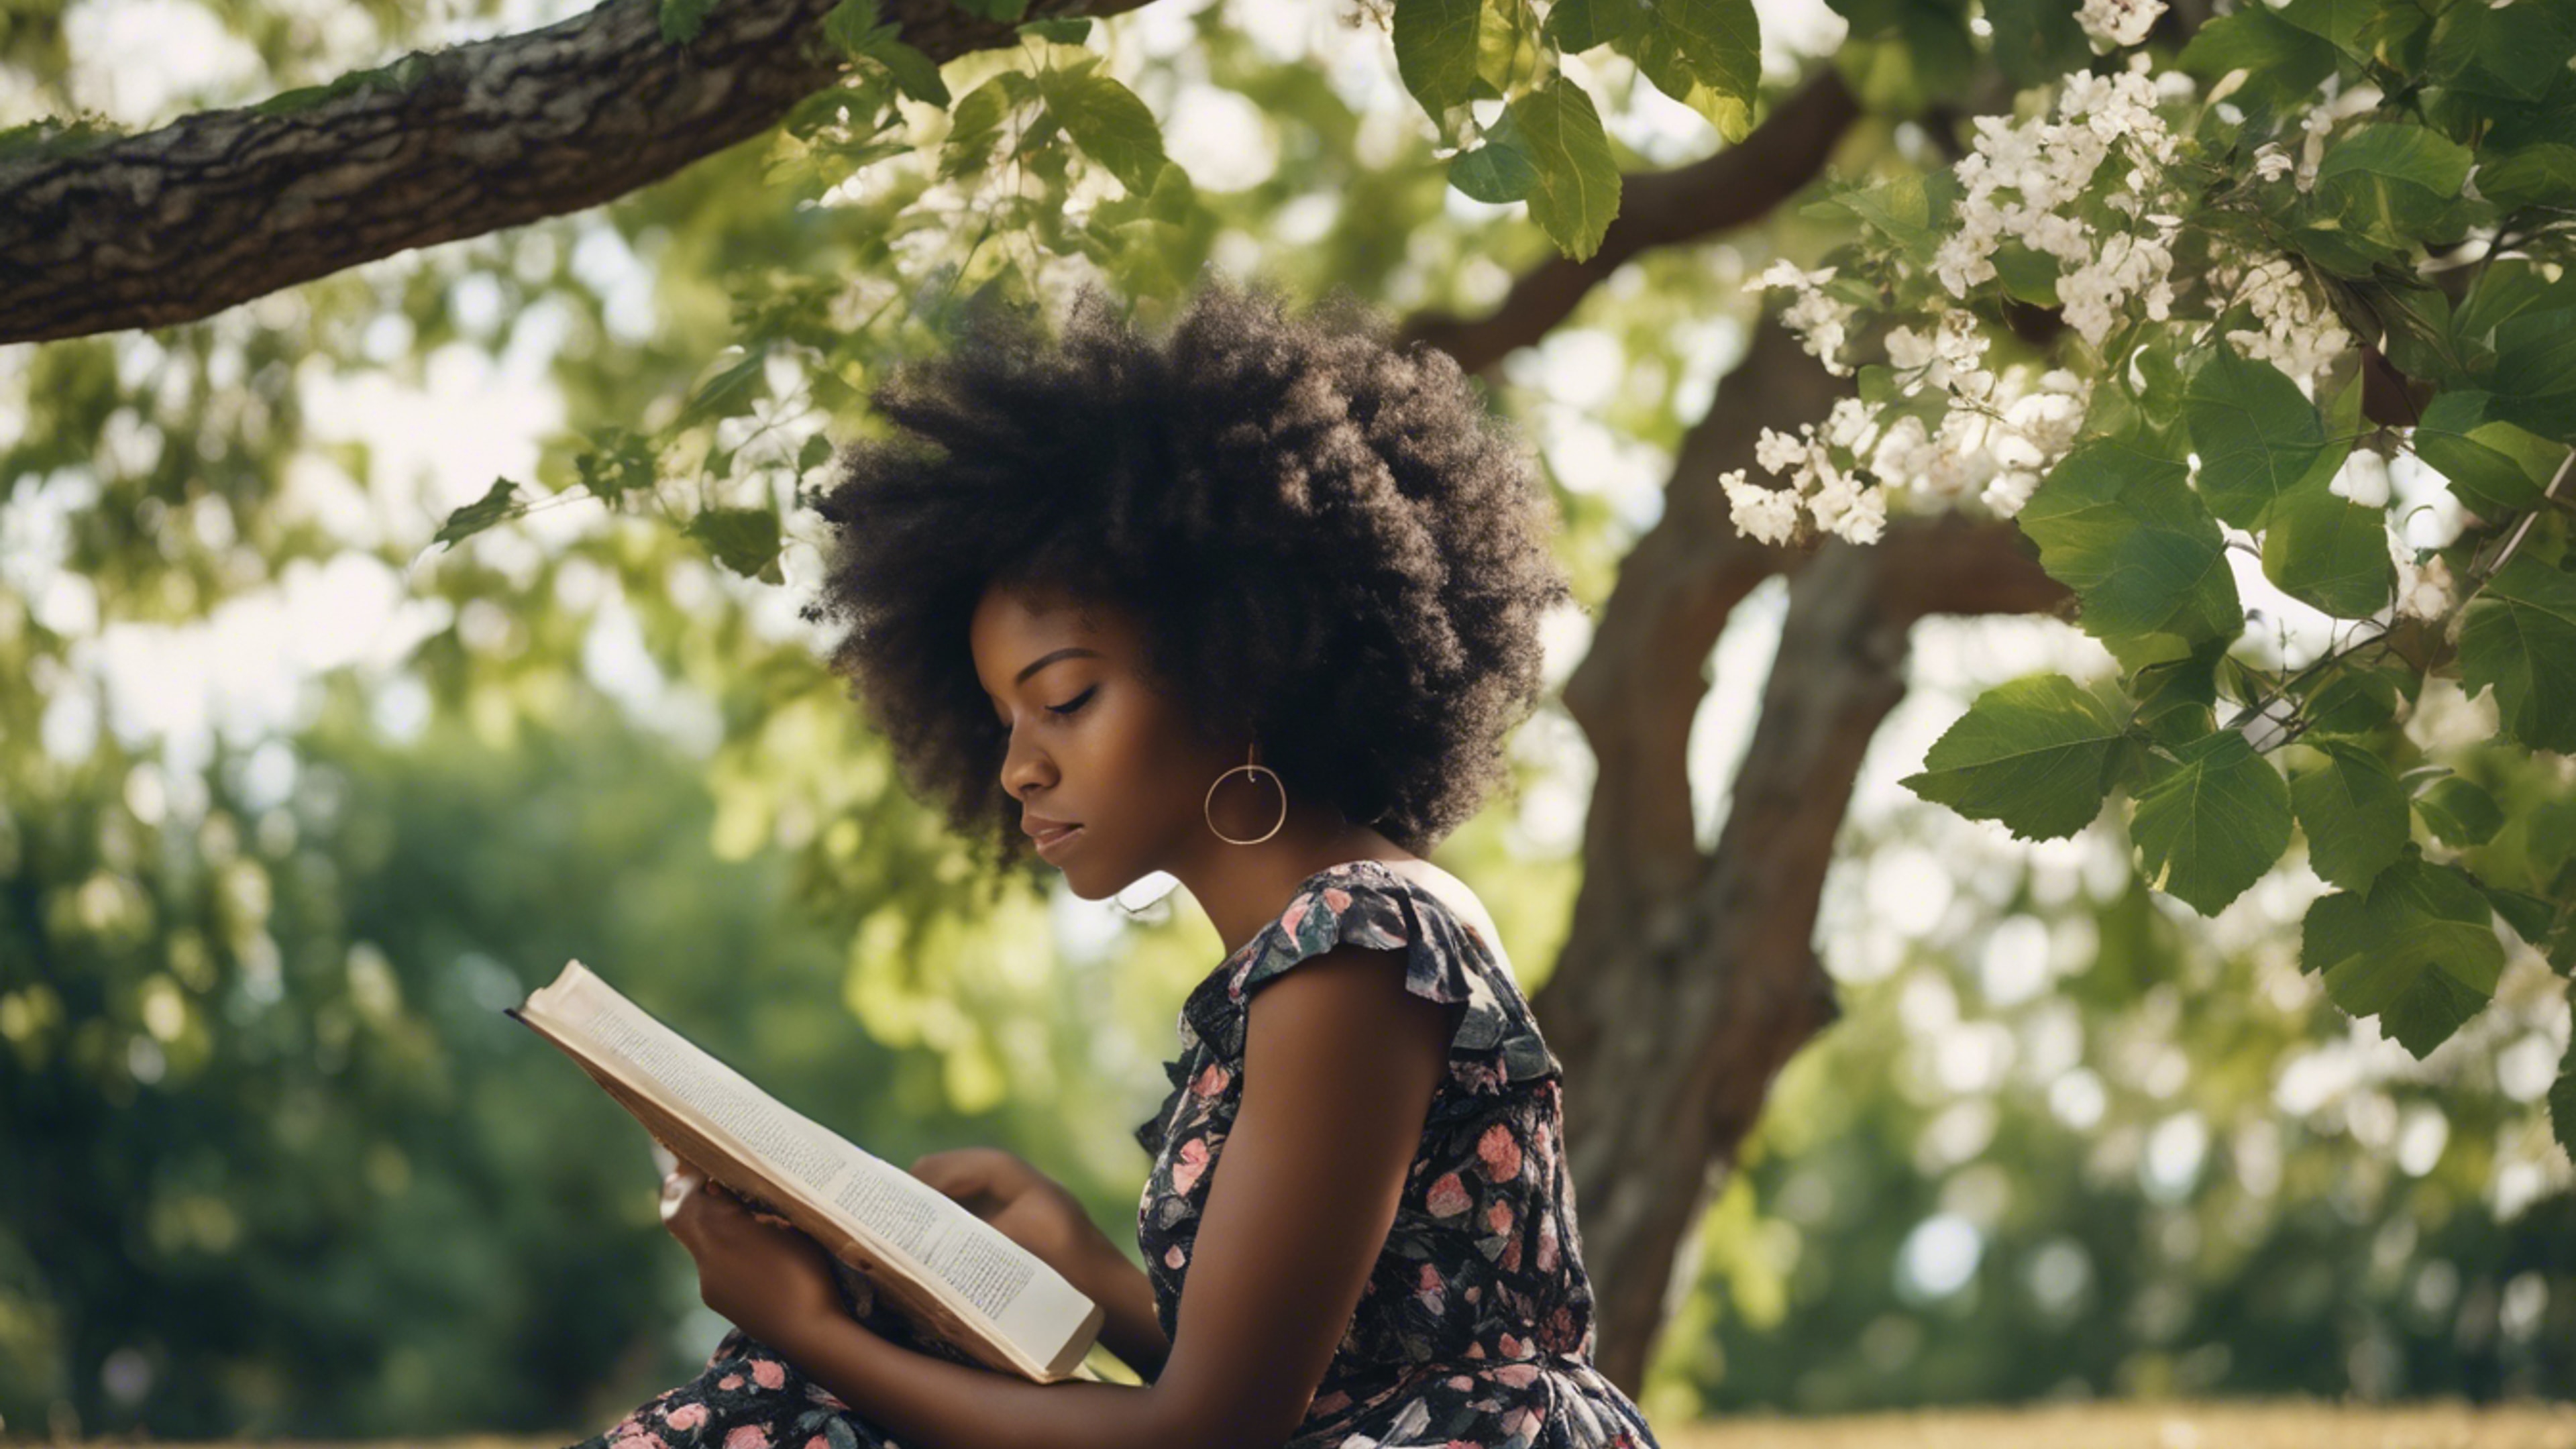 A black girl wearing a floral summer dress, reading a book under a leafy tree. Kertas dinding[43e6f52508fc47b3bd35]